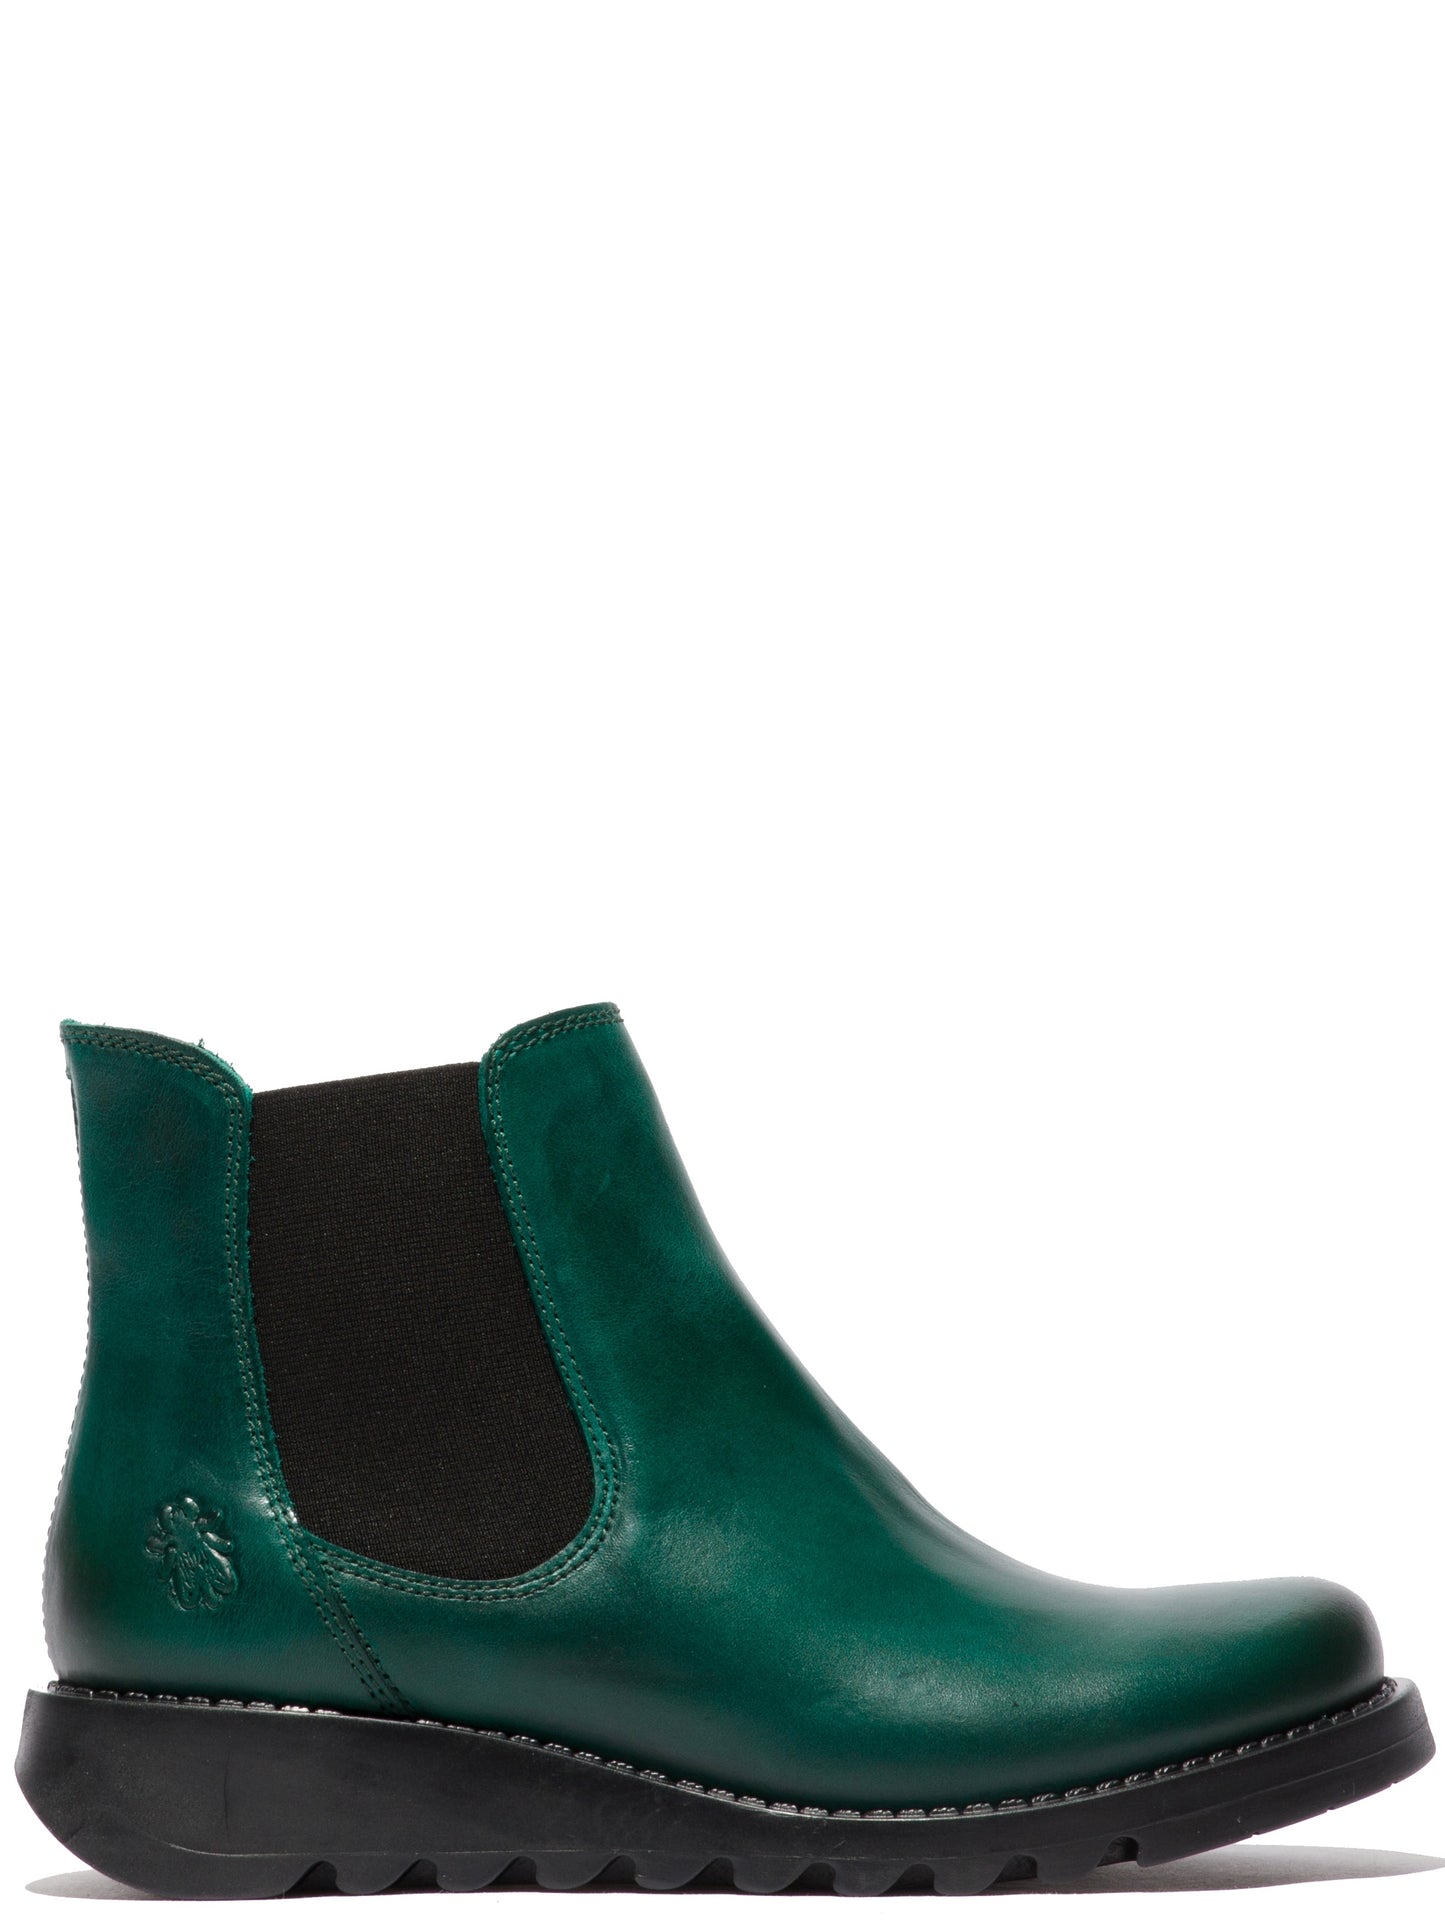 fly london  rug shamrock green salv new winter collection 2022 leather boots £120  uk7,8